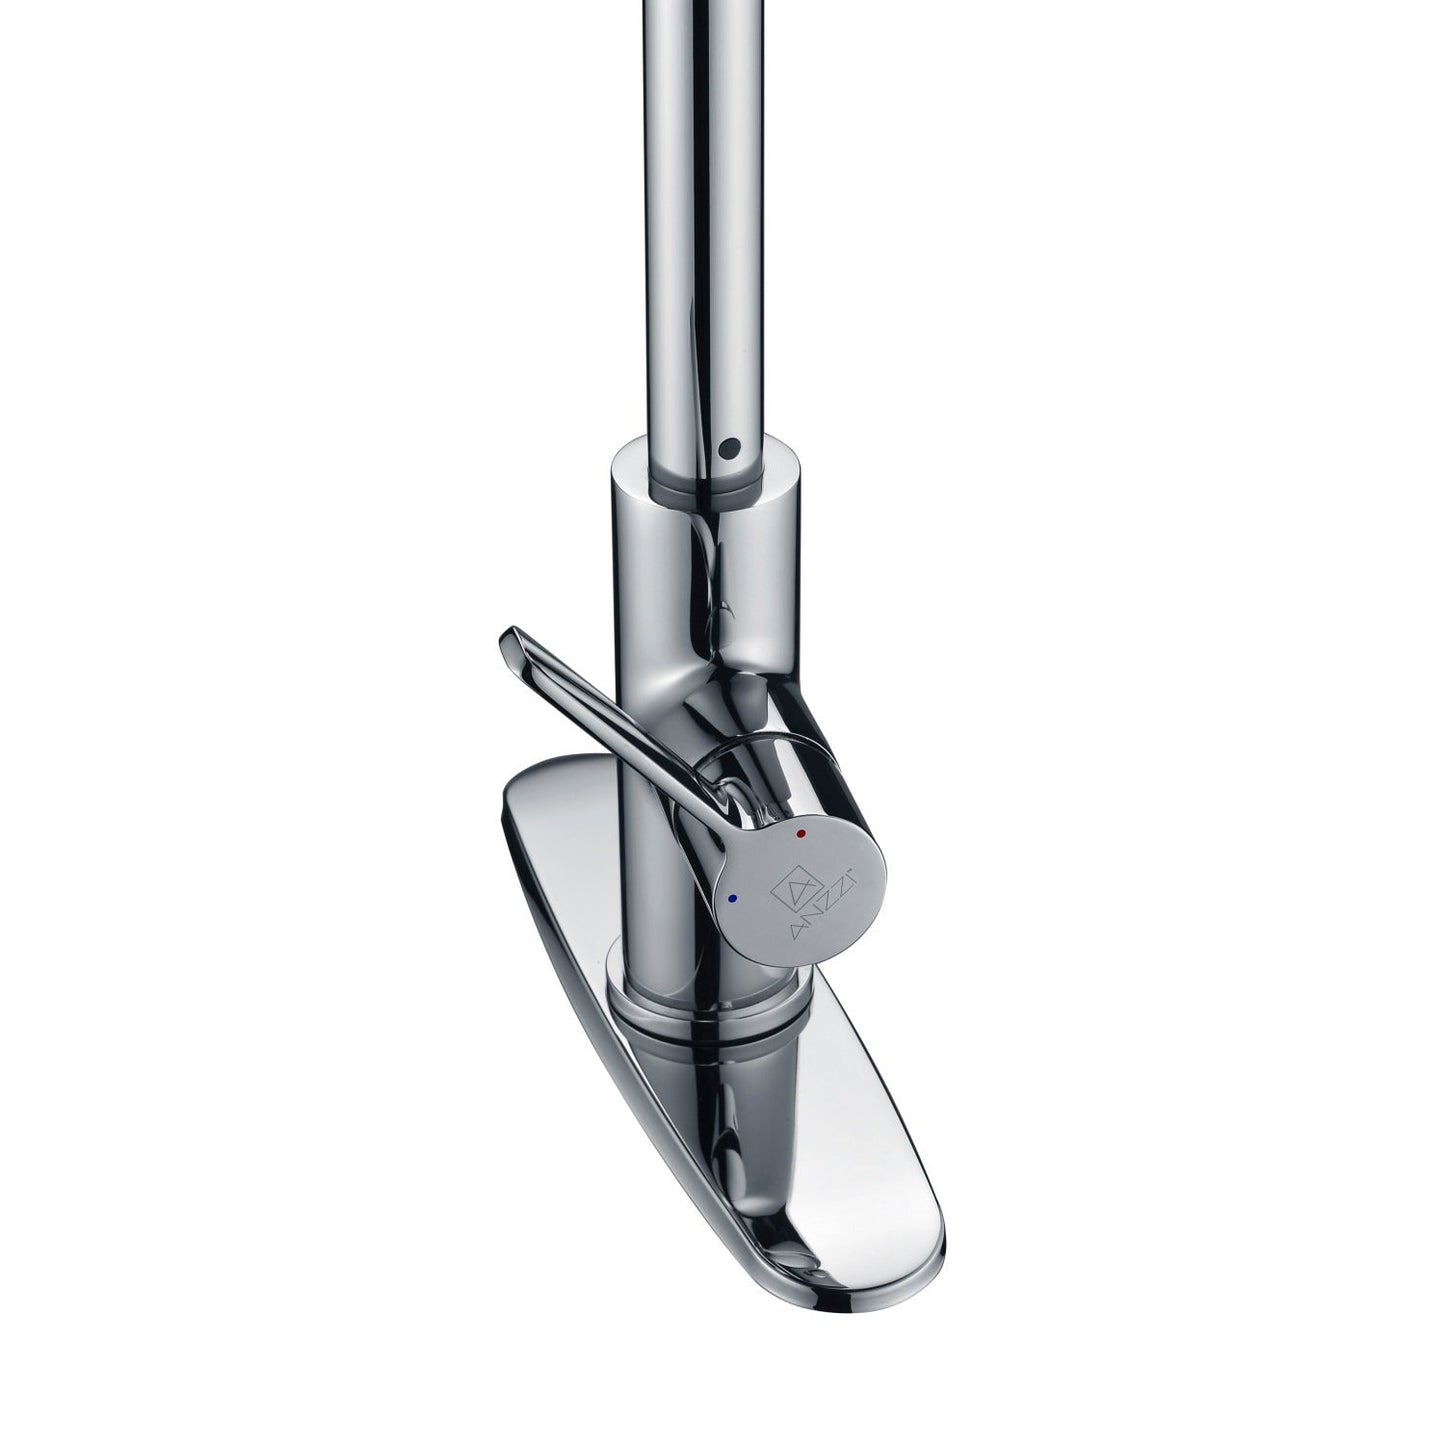 ANZZI Serena Series Single Hole Polished Chrome Kitchen Faucet With Euro-Grip Pull Down Sprayer